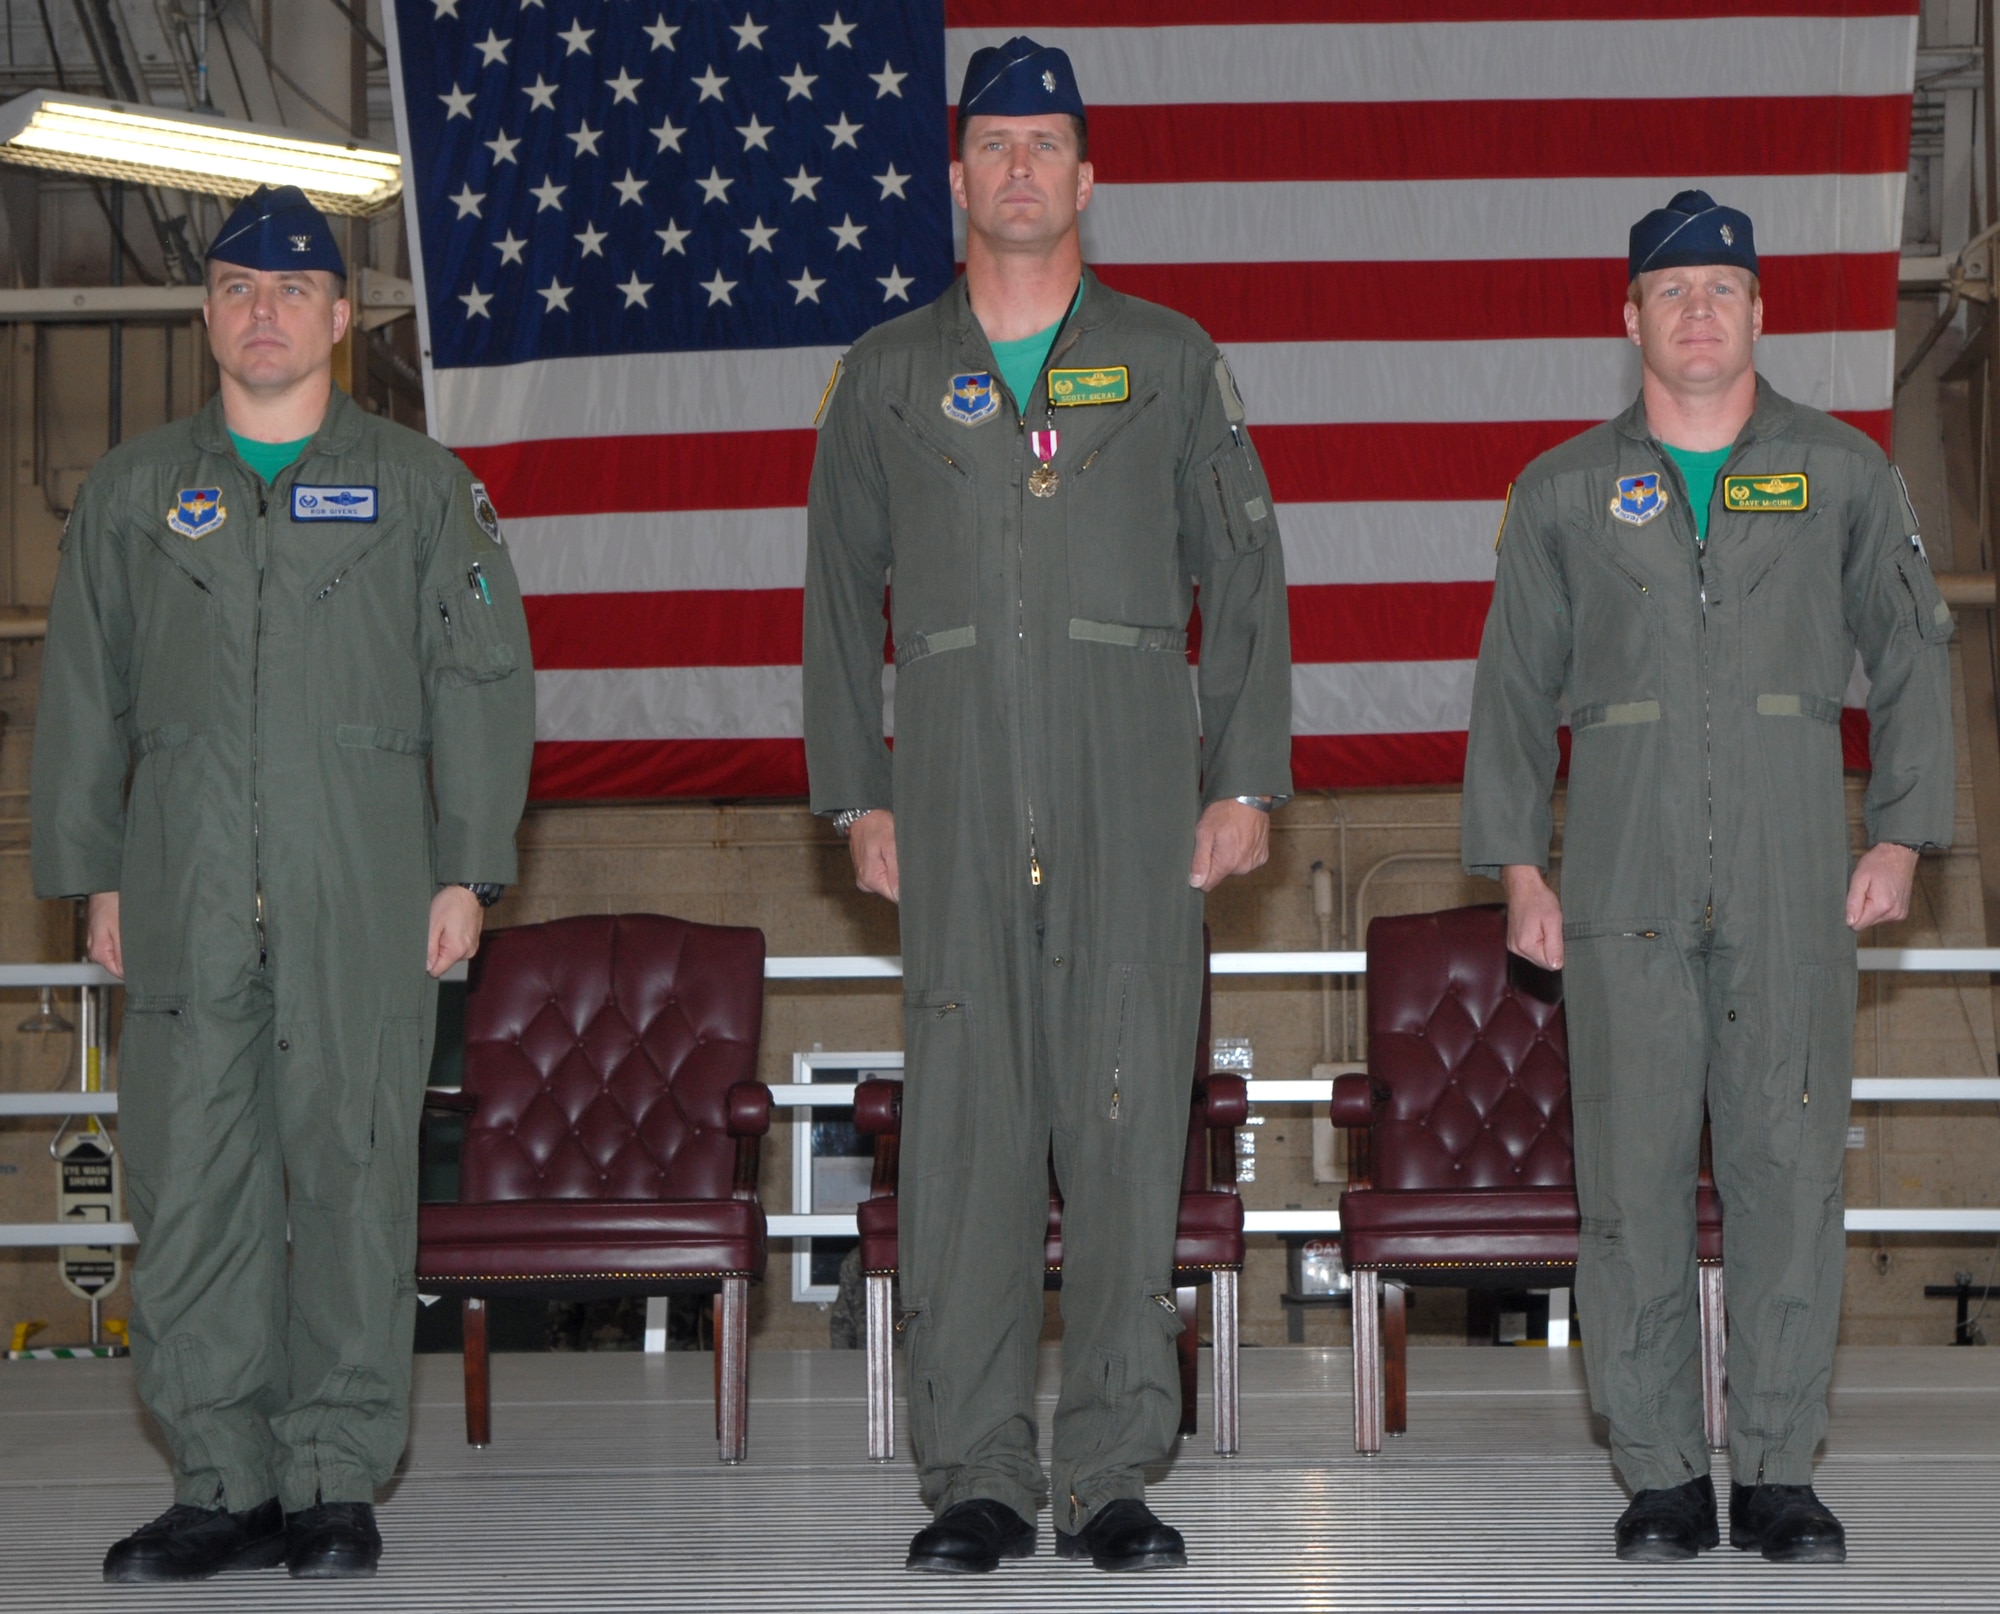 Col. Robert Givens, 56th Operations Group commander, officiated the 310th FS change of command ceremony April 24. Lt. Col. Scott Gierat, 310th FS commander, relinquished command to Lt. Col. James McCune. (Air Force photo by SSgt. Jerry Fleshman)